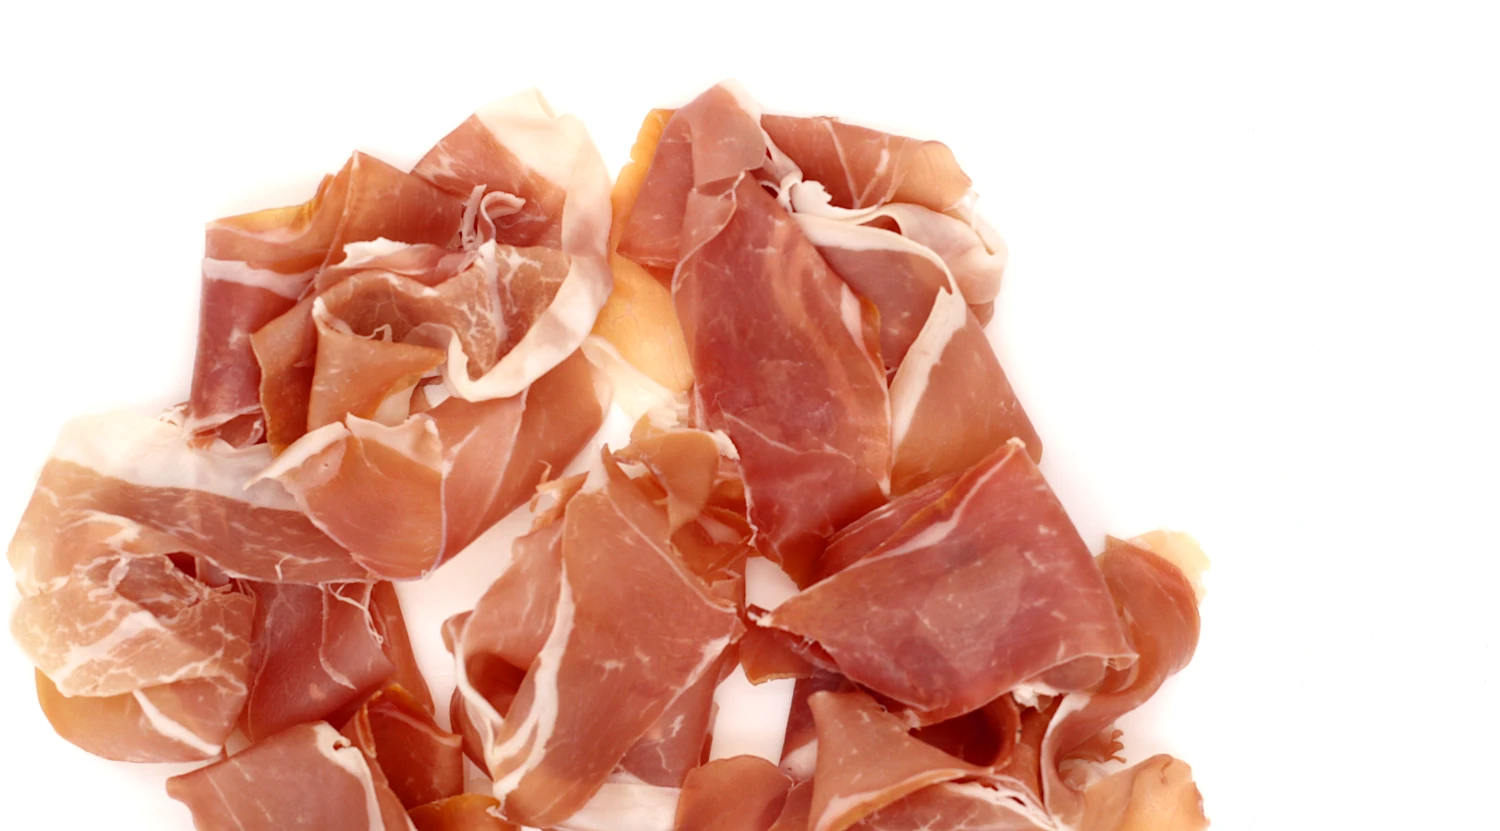 15 Substitutes for Prosciutto That the Best